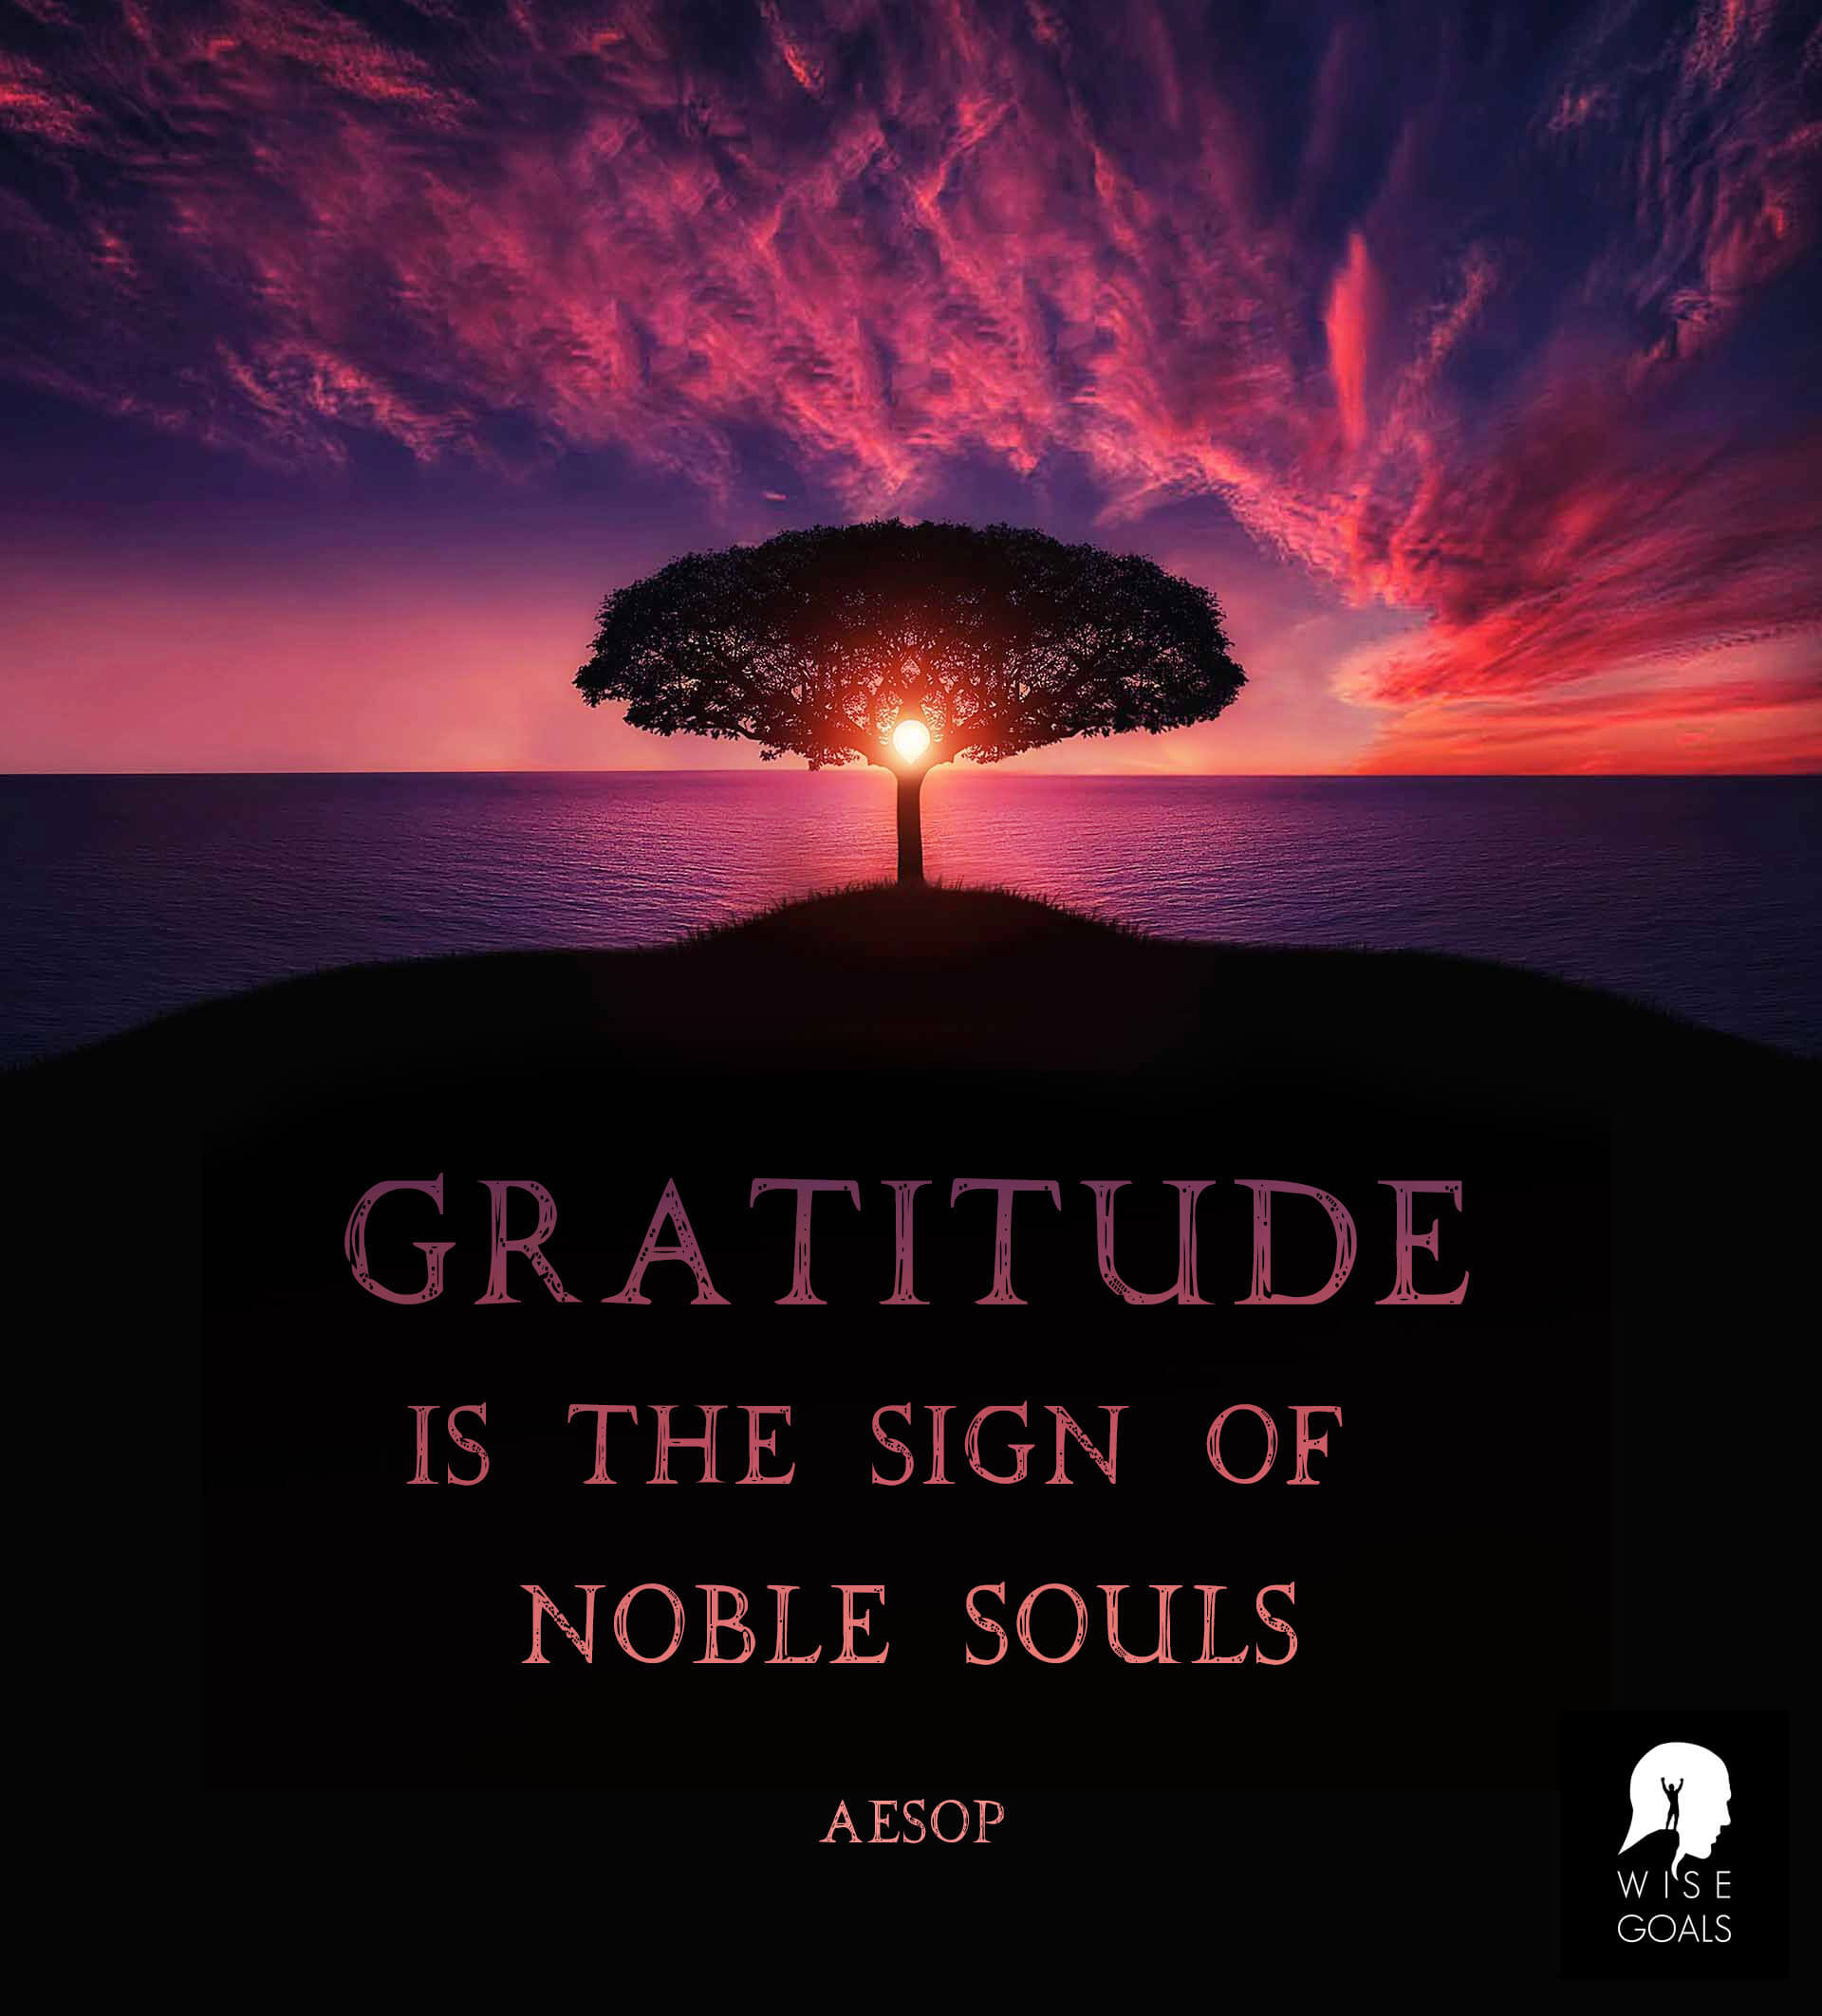 Aesop - Gratitude is the sign of noble souls quote